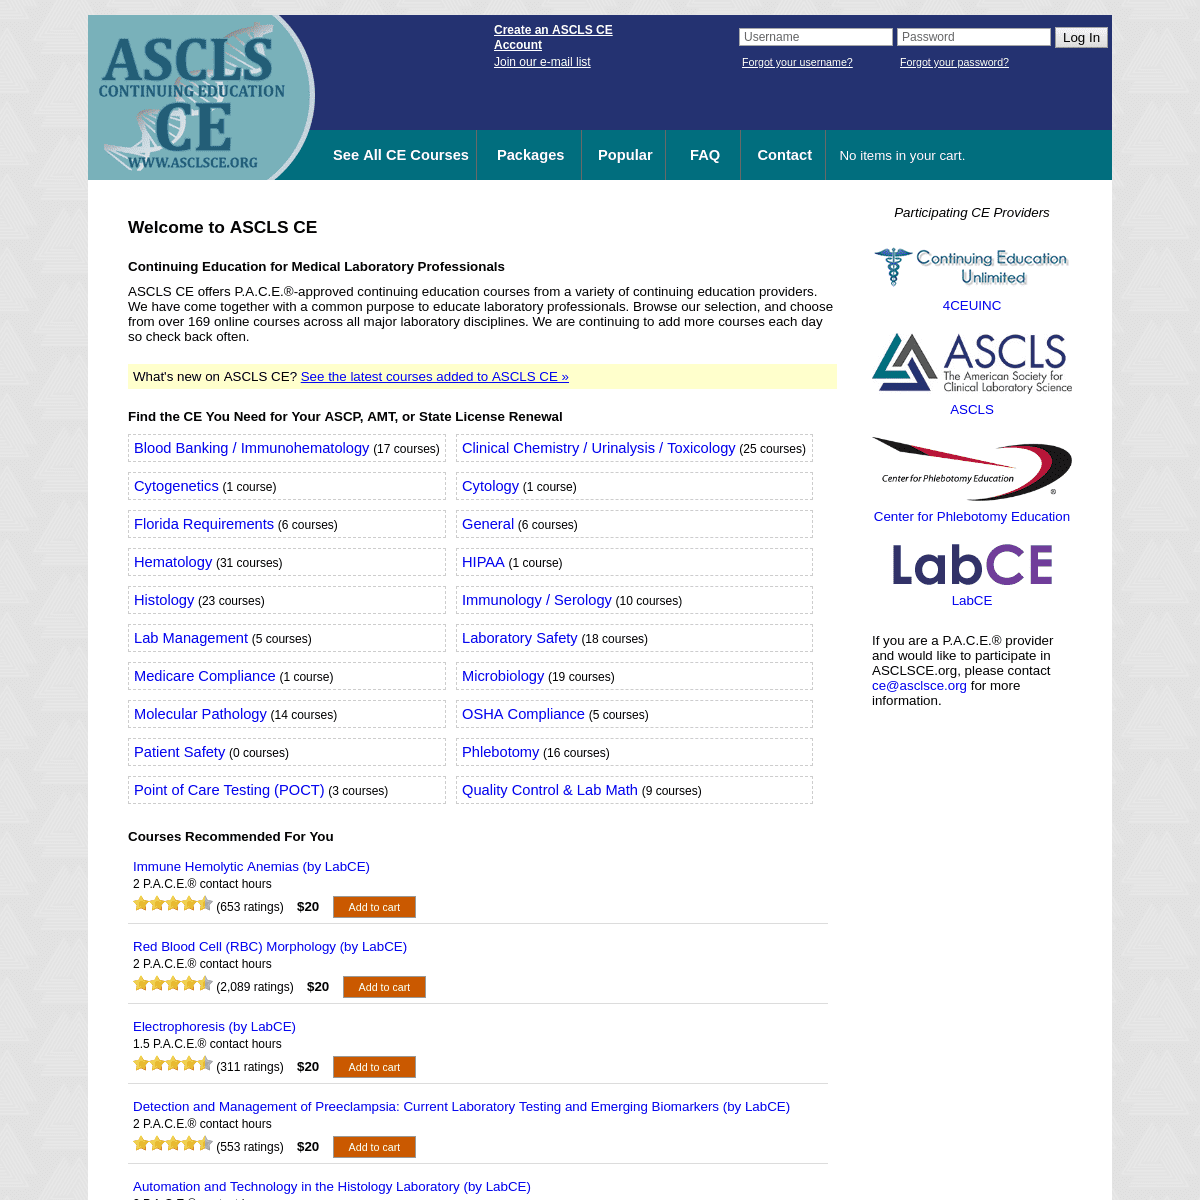 A complete backup of asclsce.org